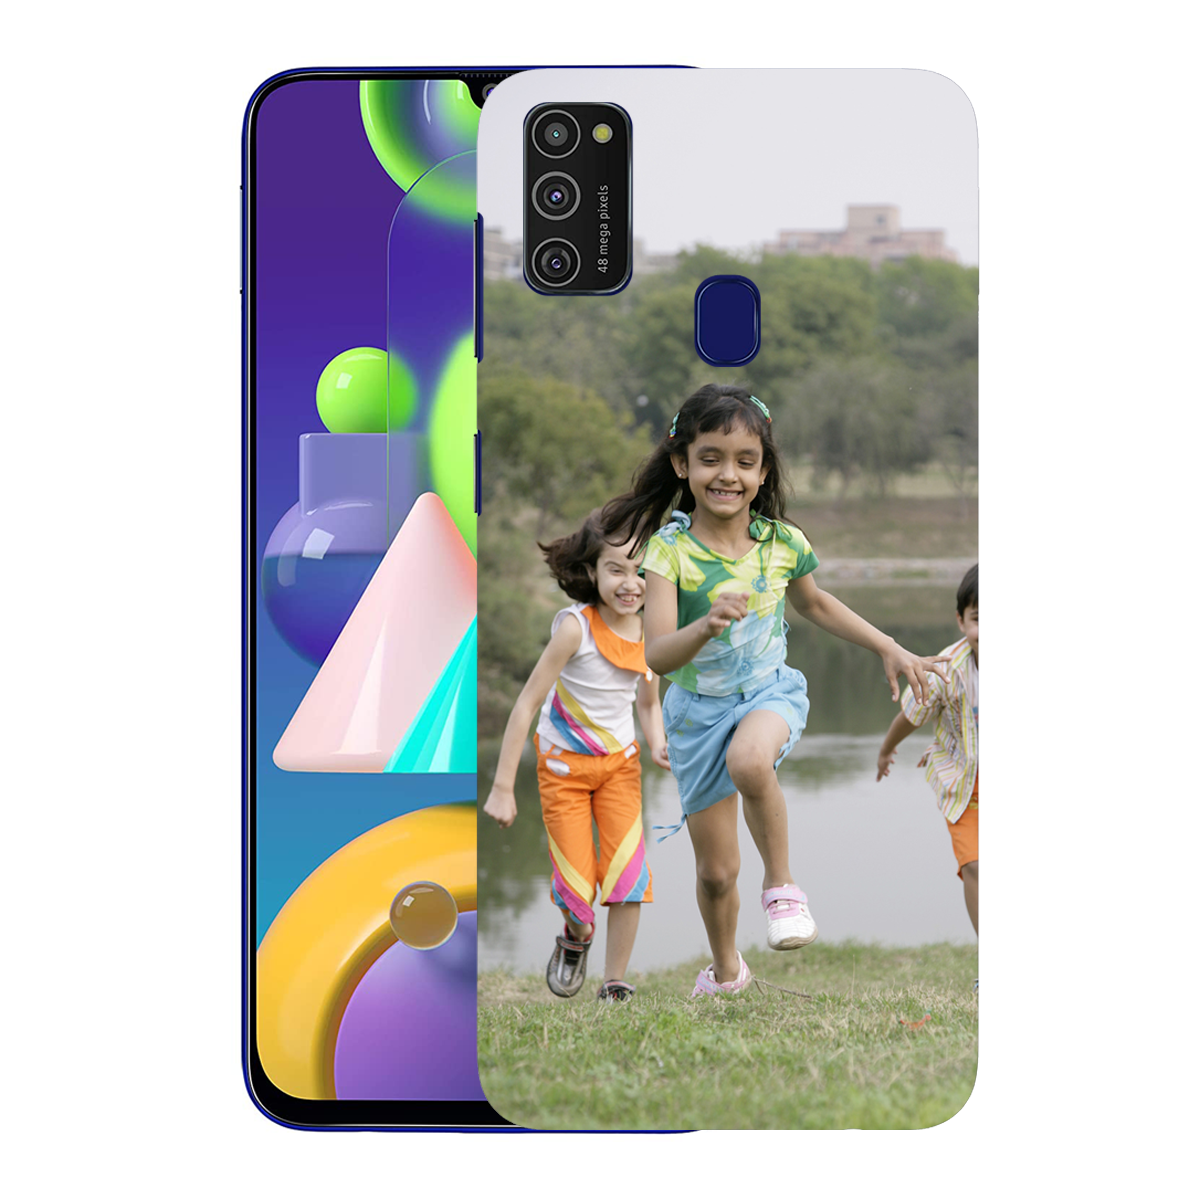 Buy Customised Samsung Galaxy M21 Mobile Covers/ Cases Online India - Zestpics